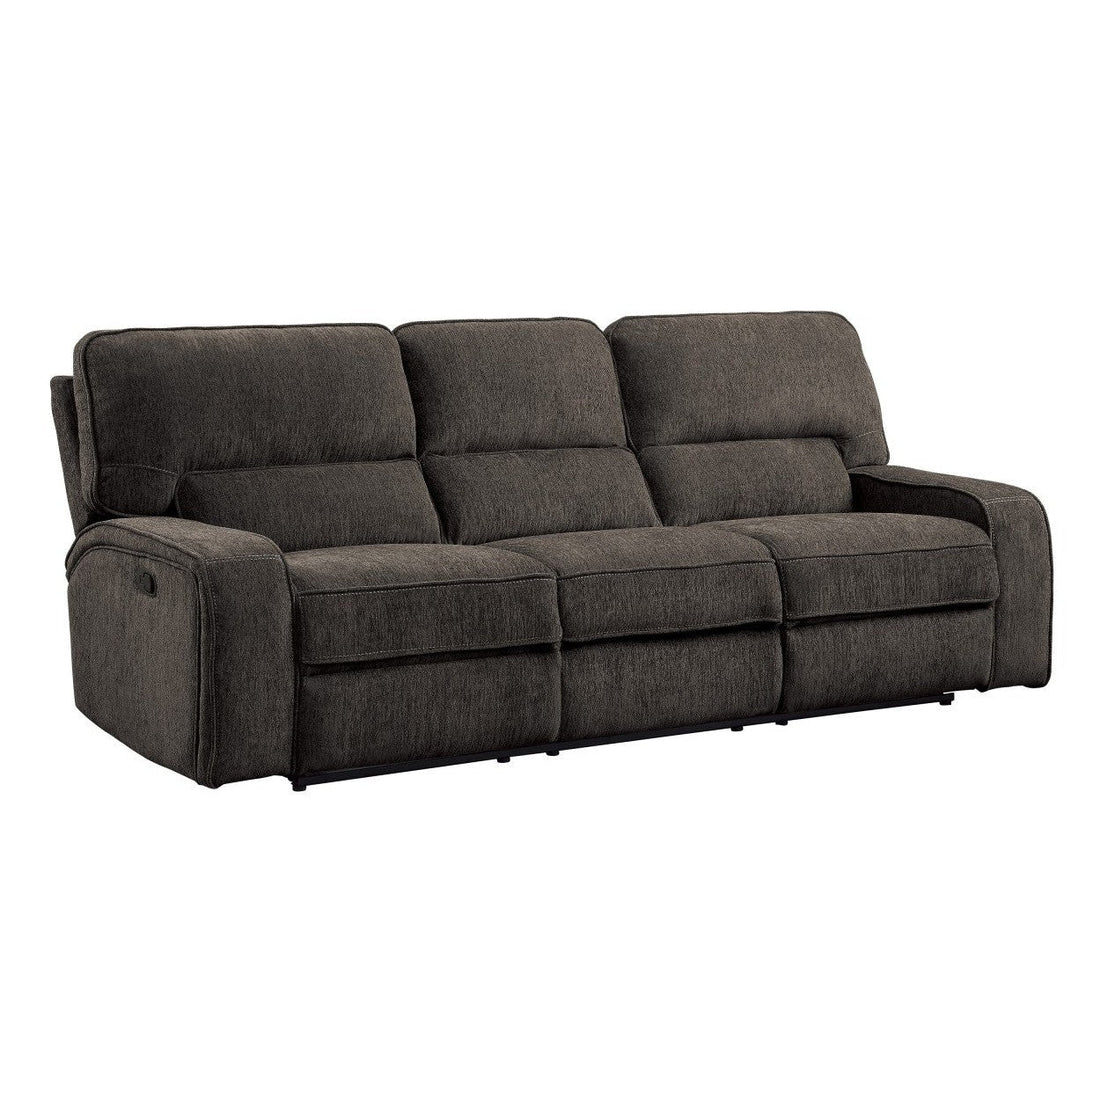 DOUBLE RECLINING SOFA, CHOCOLATE 100% POLYESTER 9849CH-3